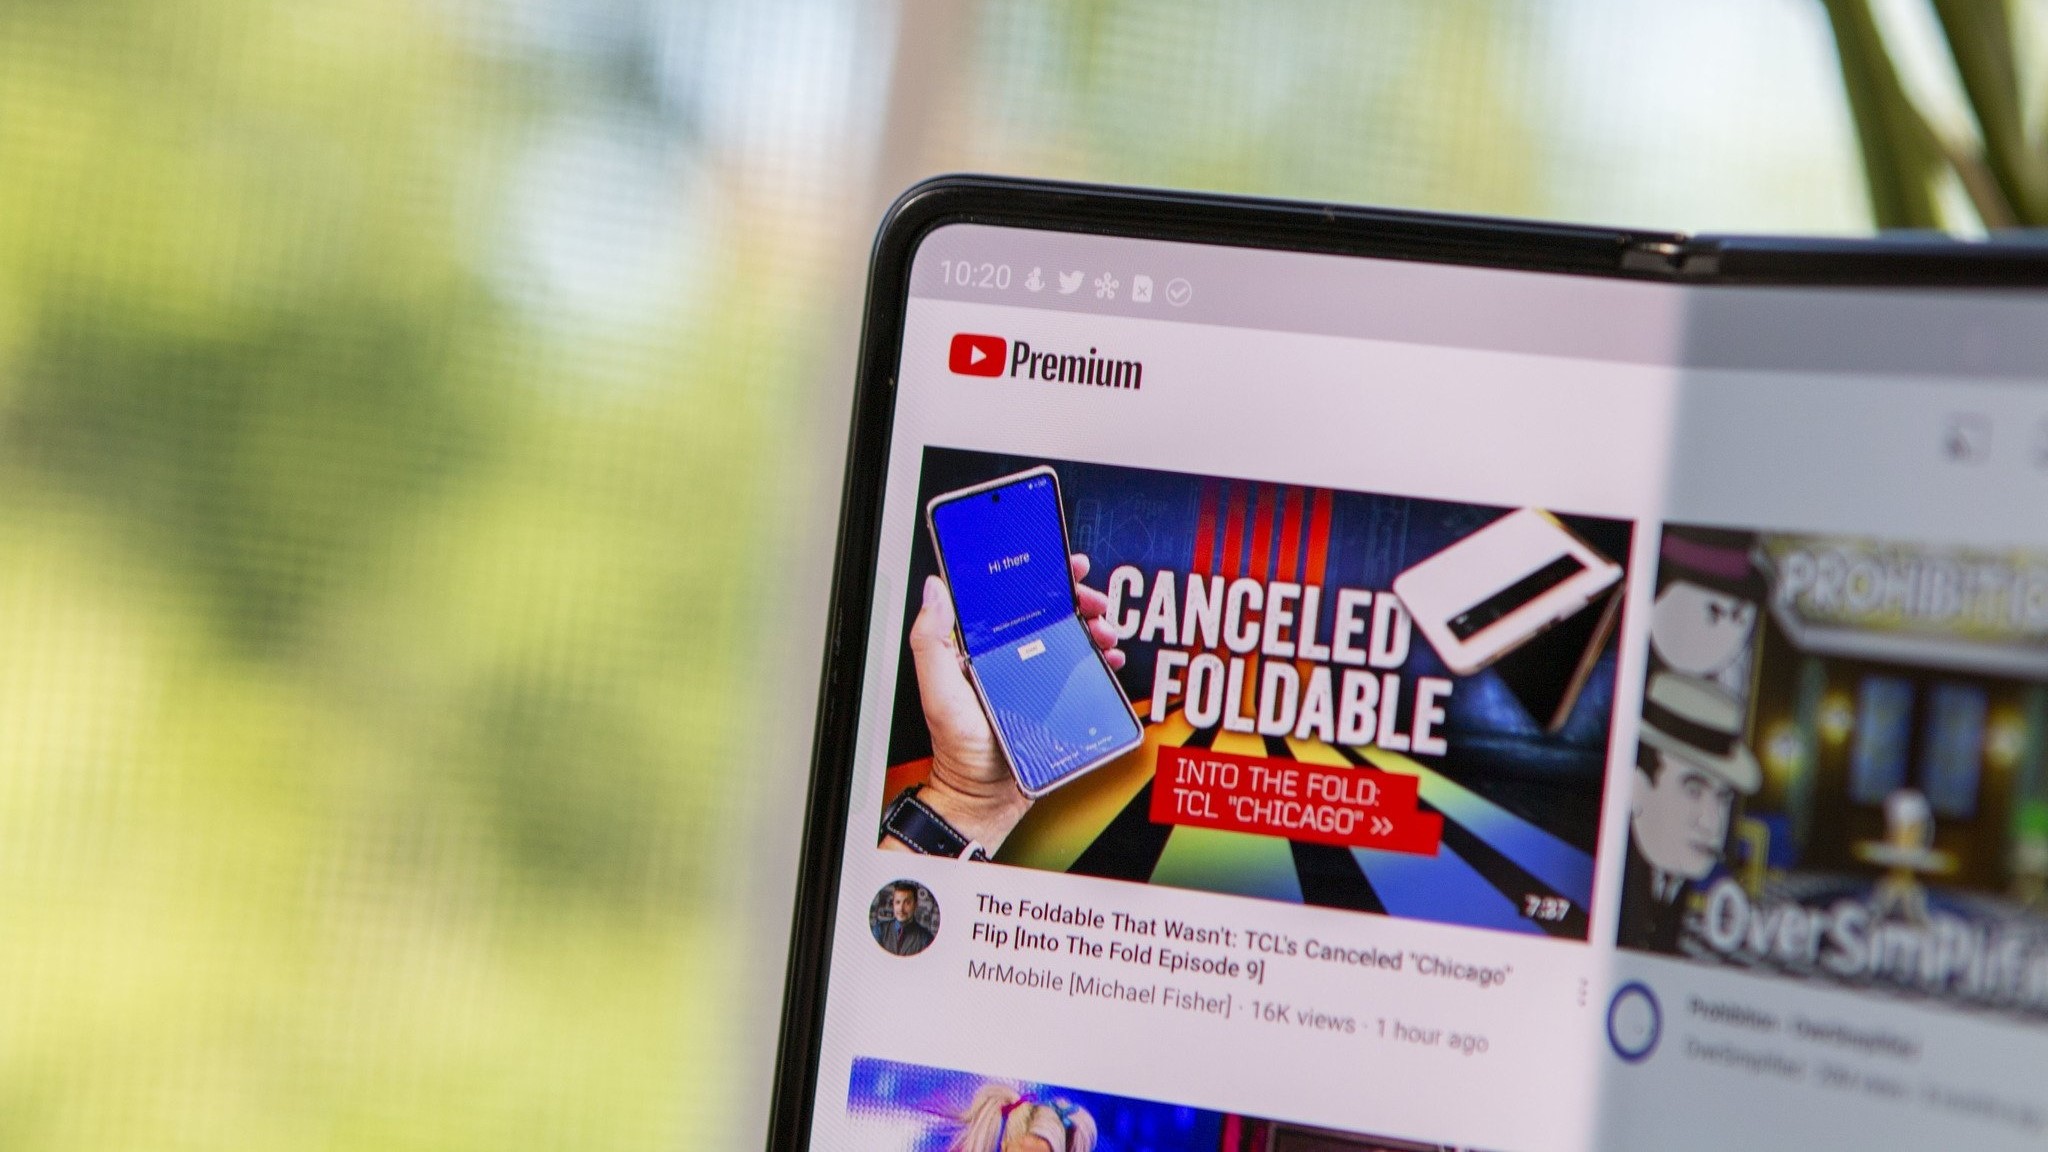 YouTube Tests New Way to Display Ads on TVs